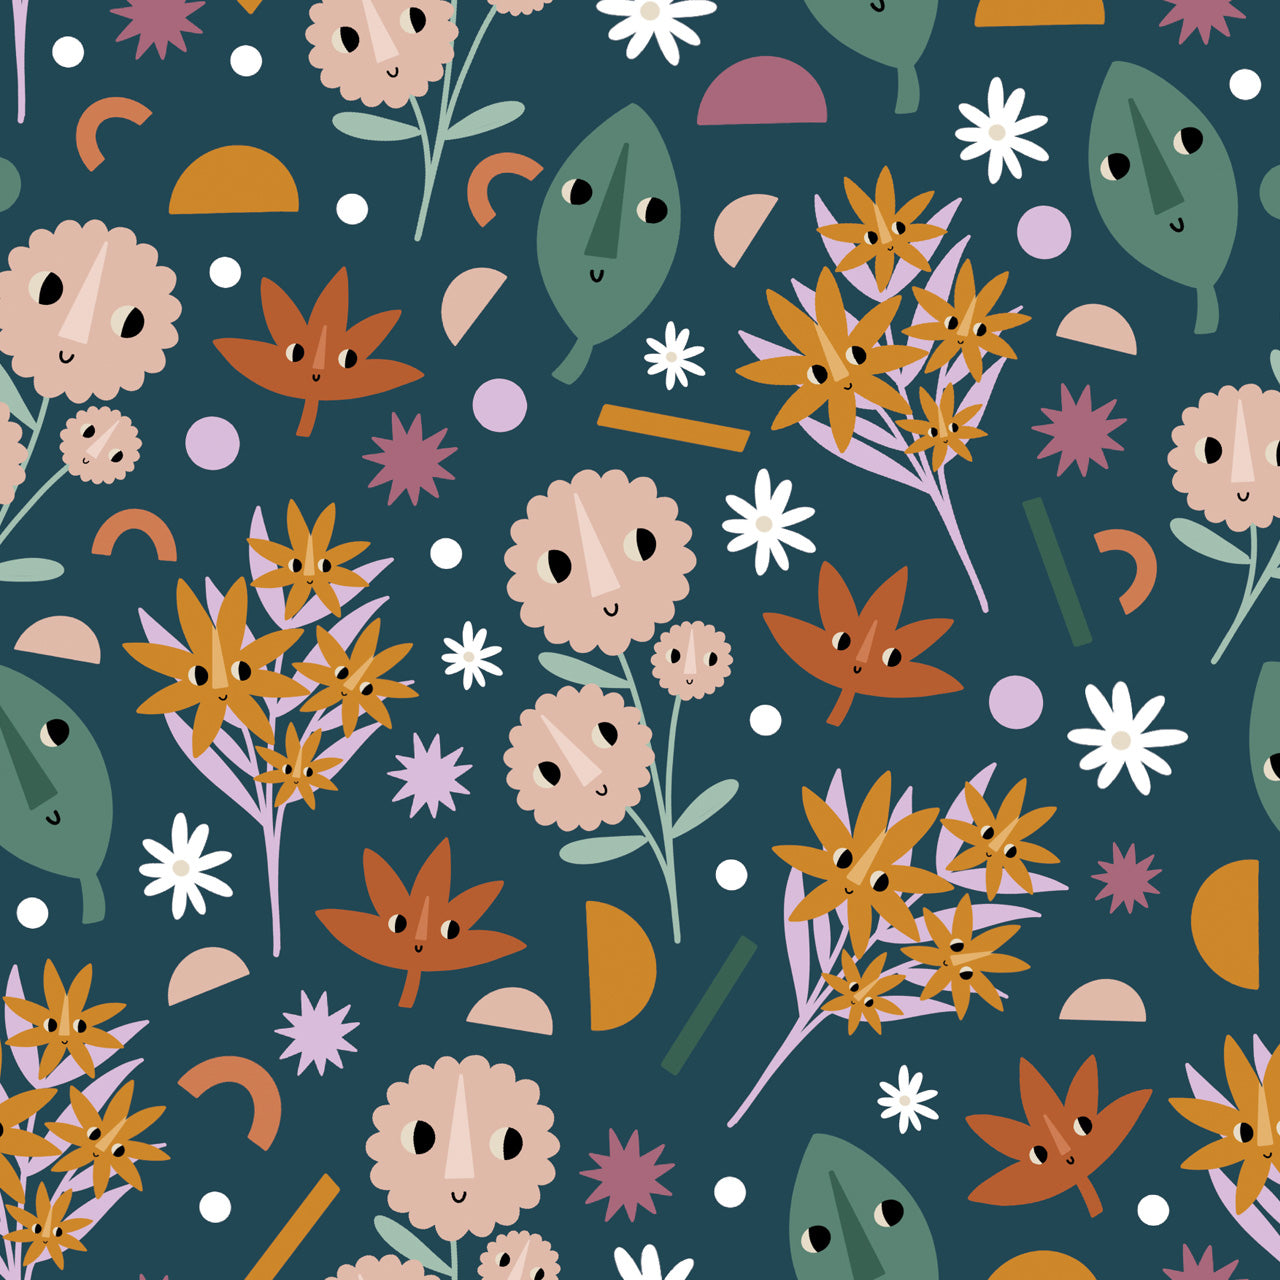 Happy Plants & Shapes On Dark Teal Quilting Cotton